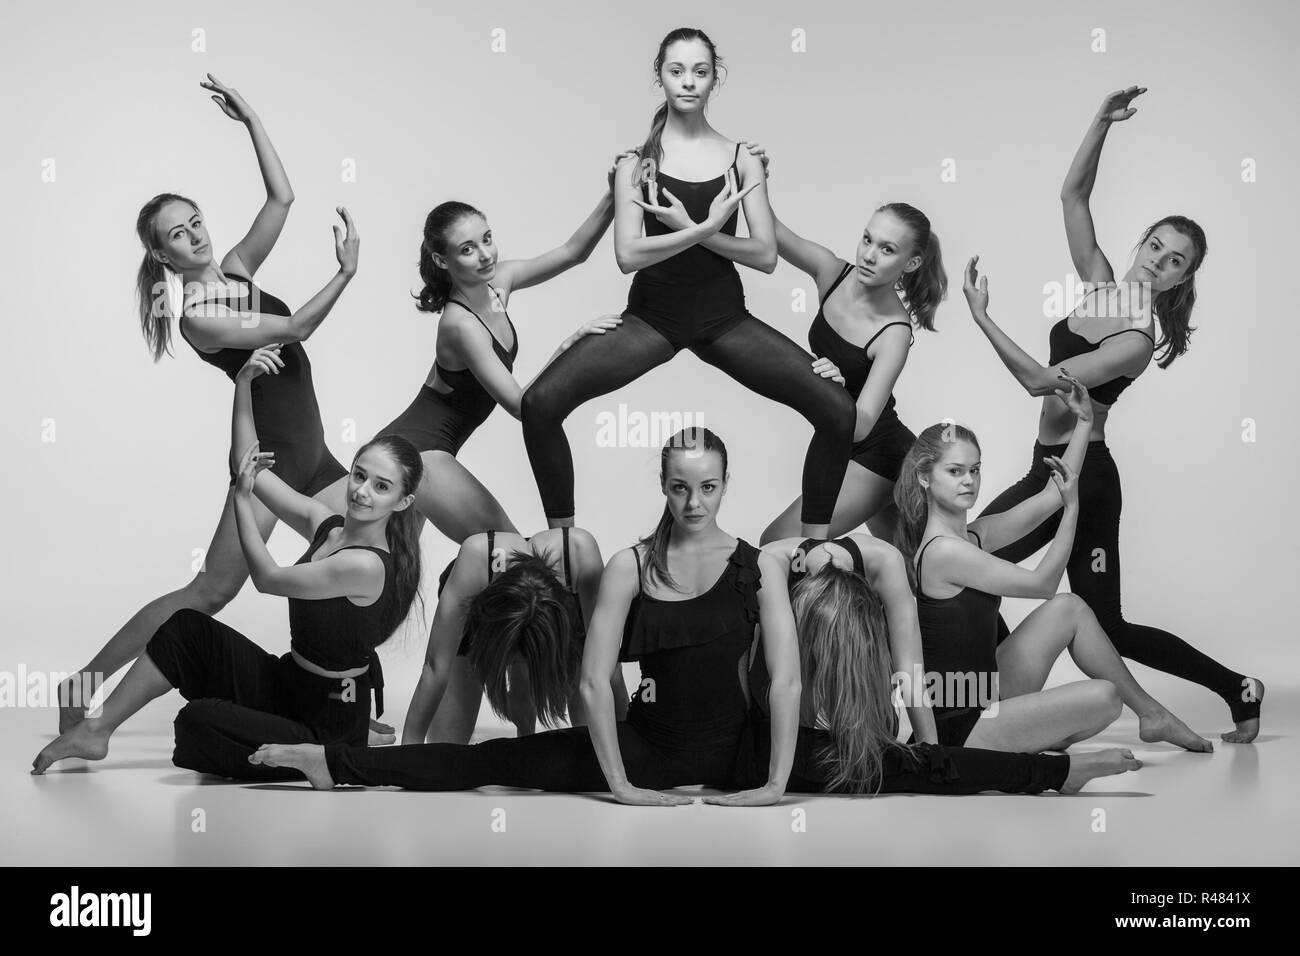 Teen dancers Black and White Stock Photos & Images - Alamy